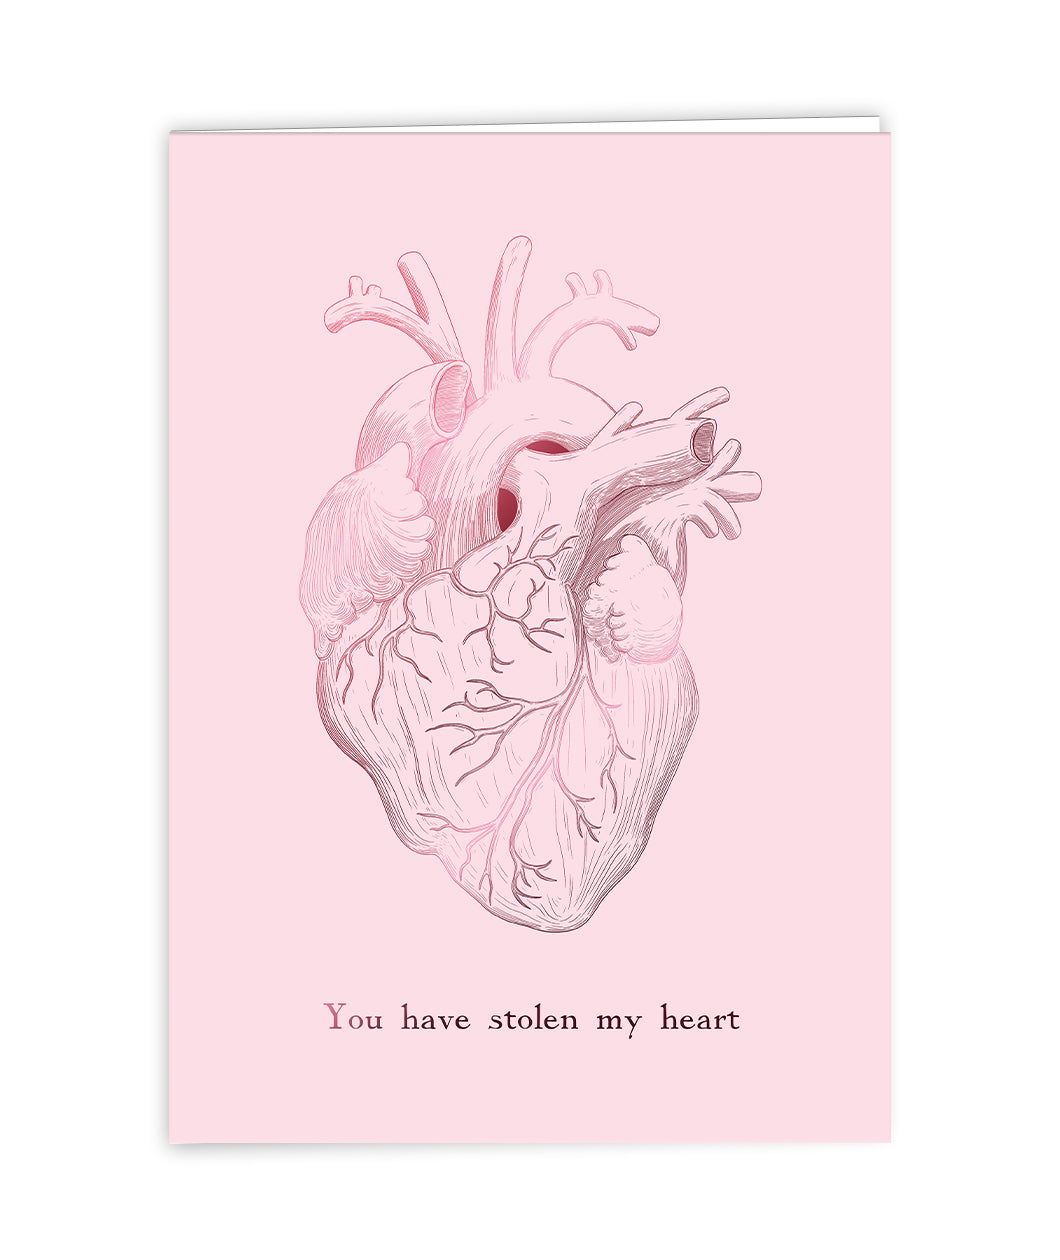 Valentine's Day: Why the heart icon looks nothing like a human organ